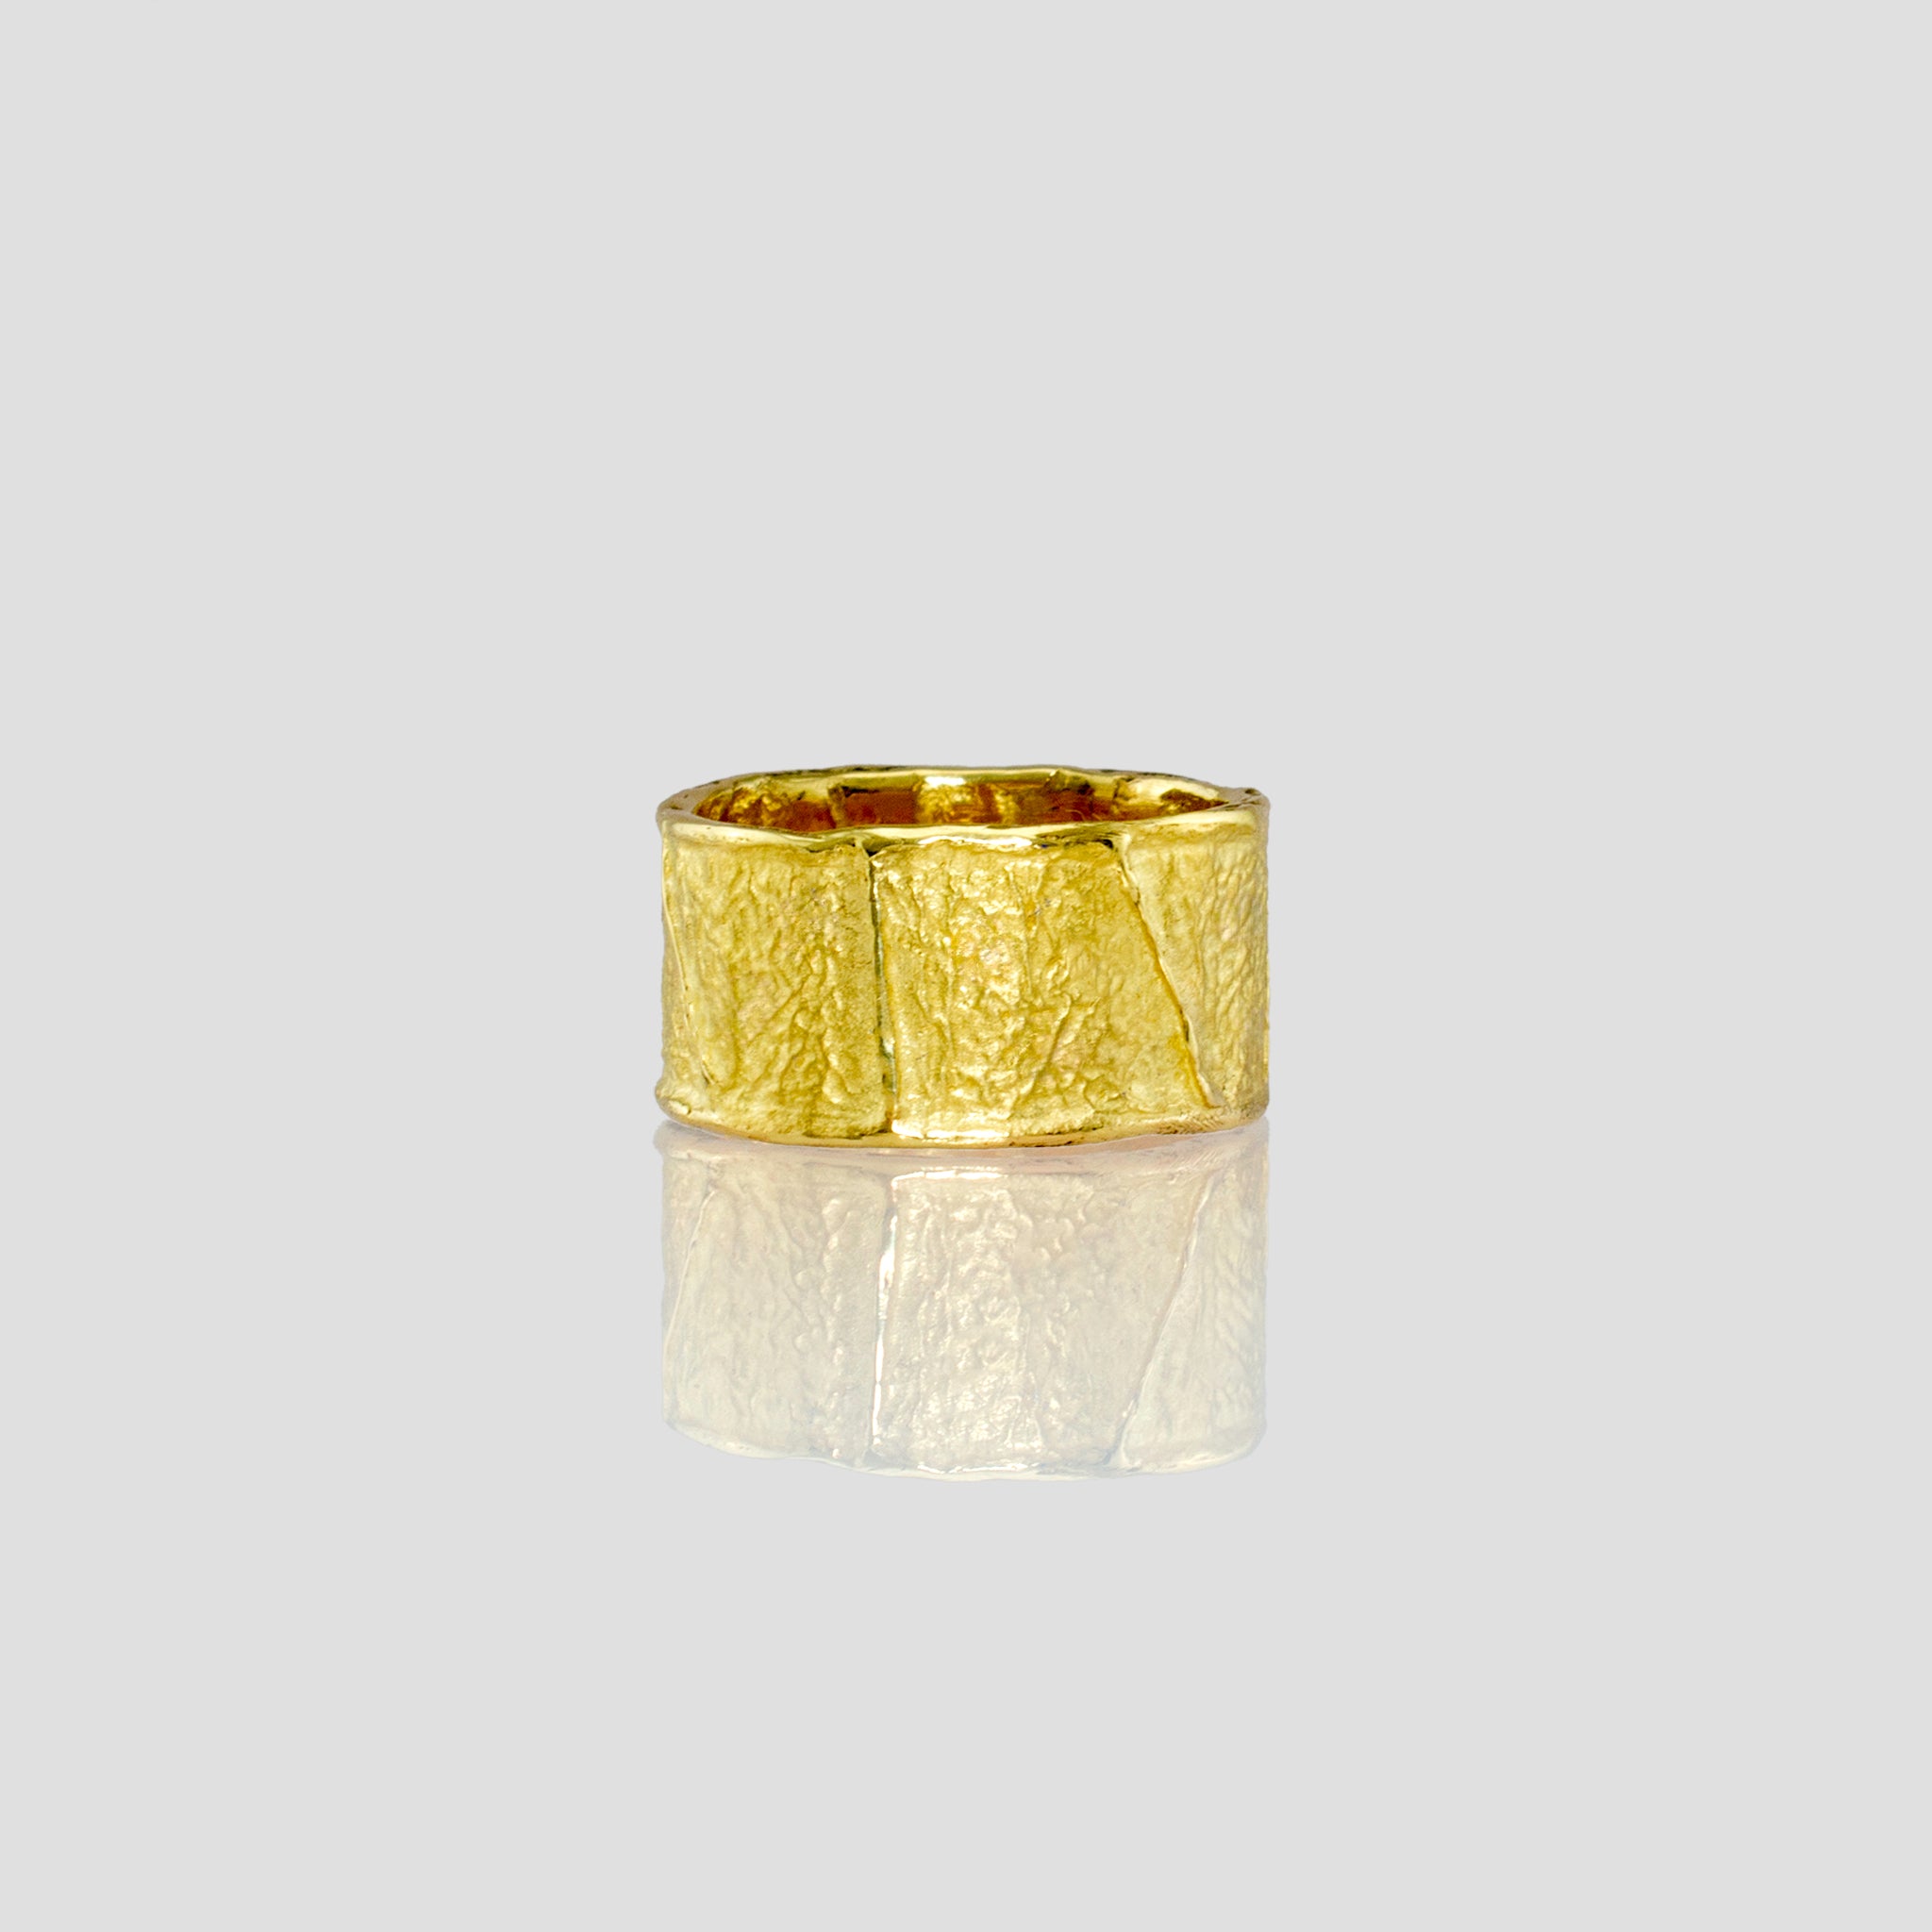 A beautifully crafted 18k Yellow Gold Ring with an innovative wrinkled texture, drawing inspiration from ancient Egyptian elegance, showcased in a sleek and sophisticated style without diamonds.